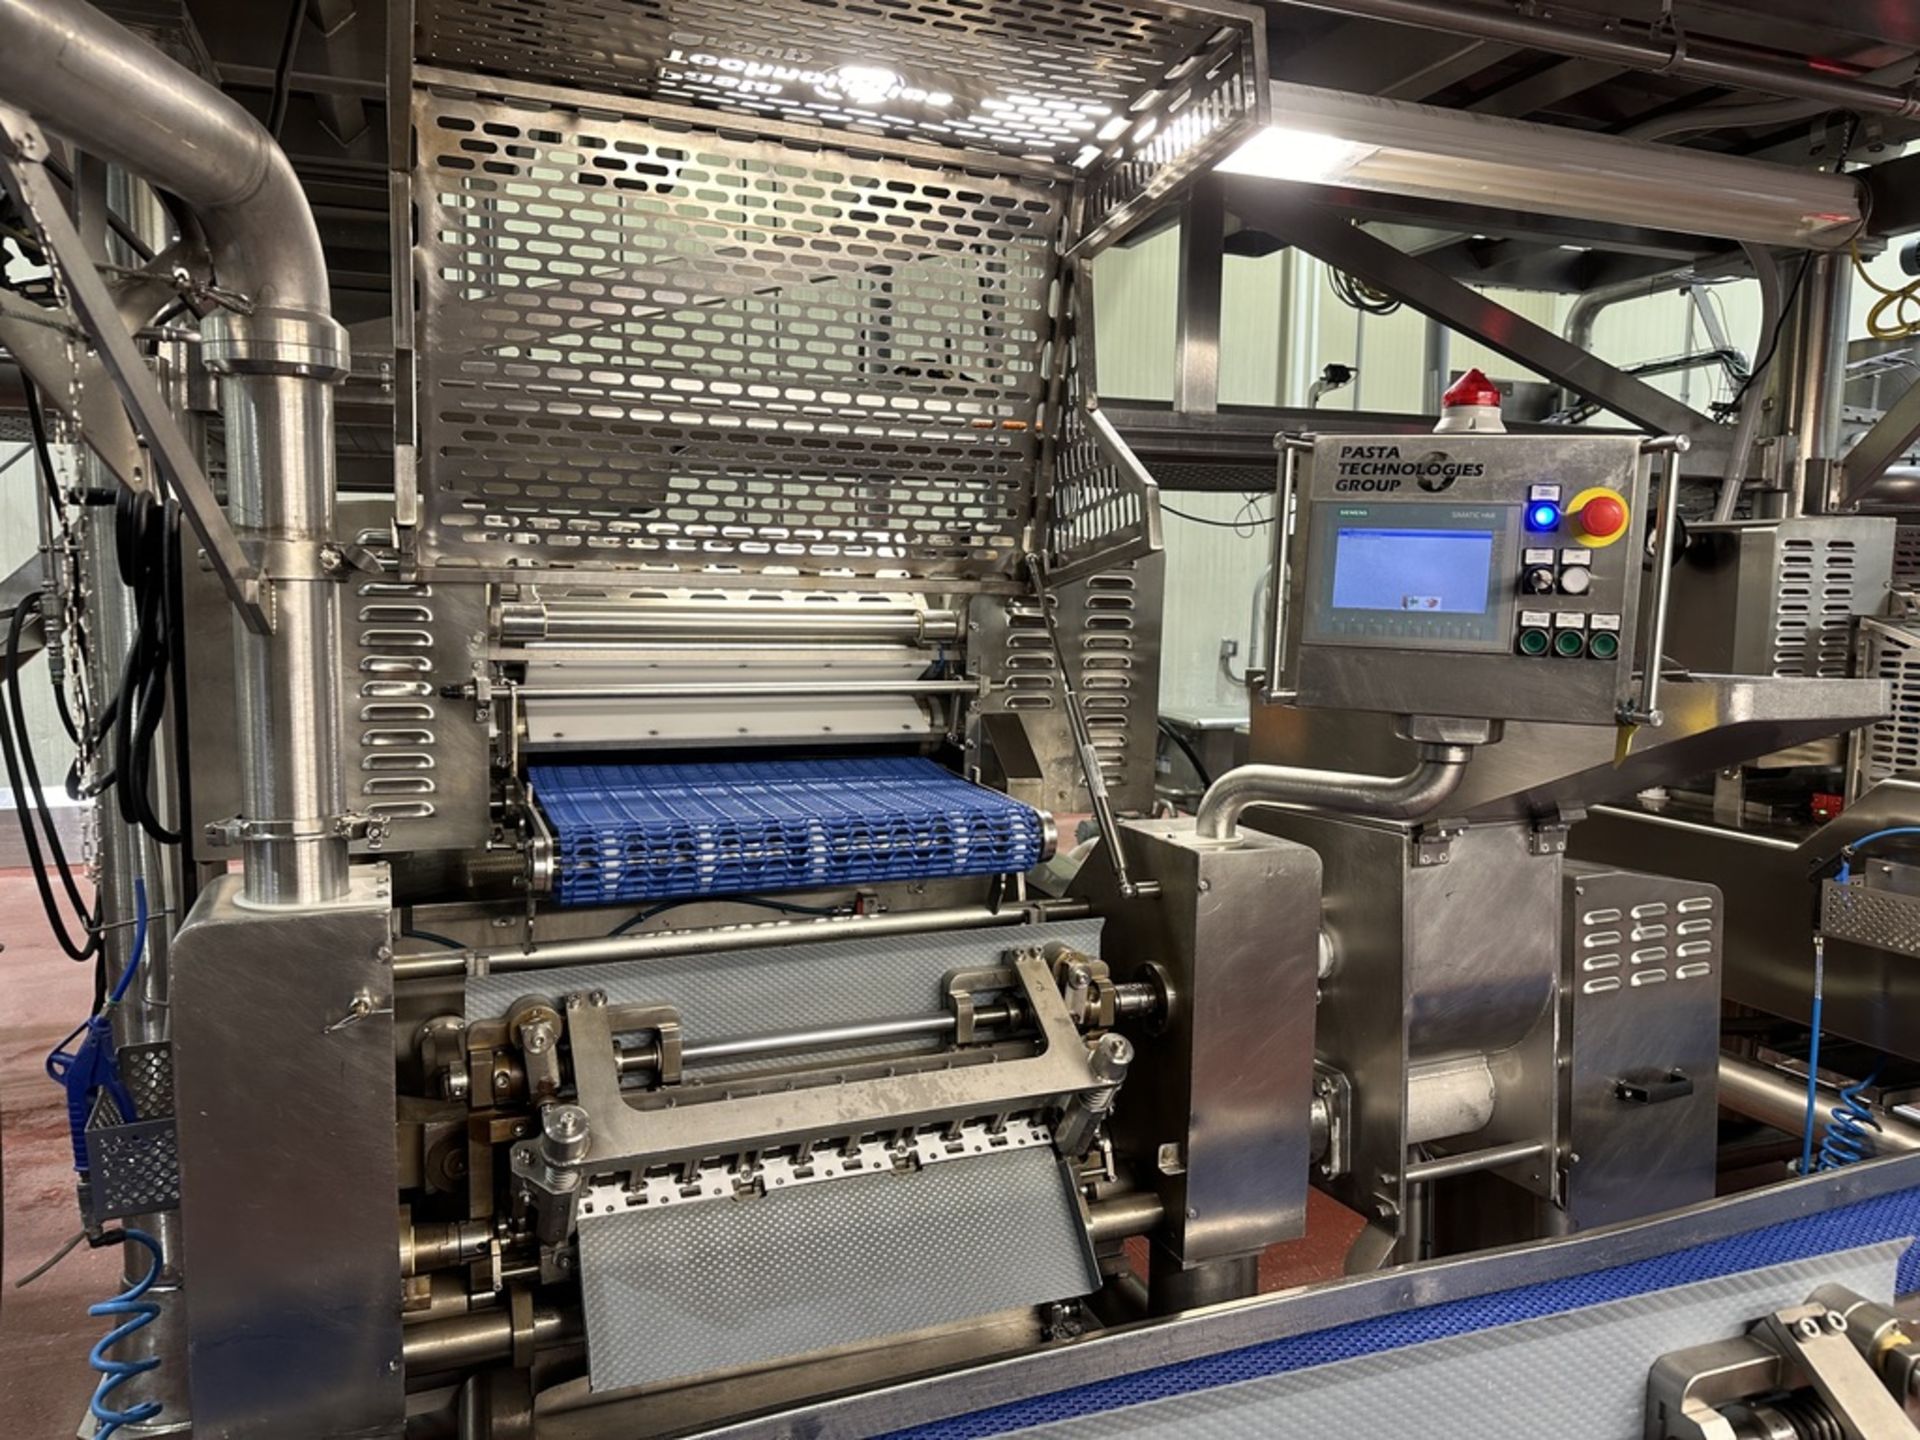 2018 Pasta Technologies FA549 Pinched Product Forming Machine with Tor - Subj to Bulk | Rig Fee $750 - Image 2 of 3